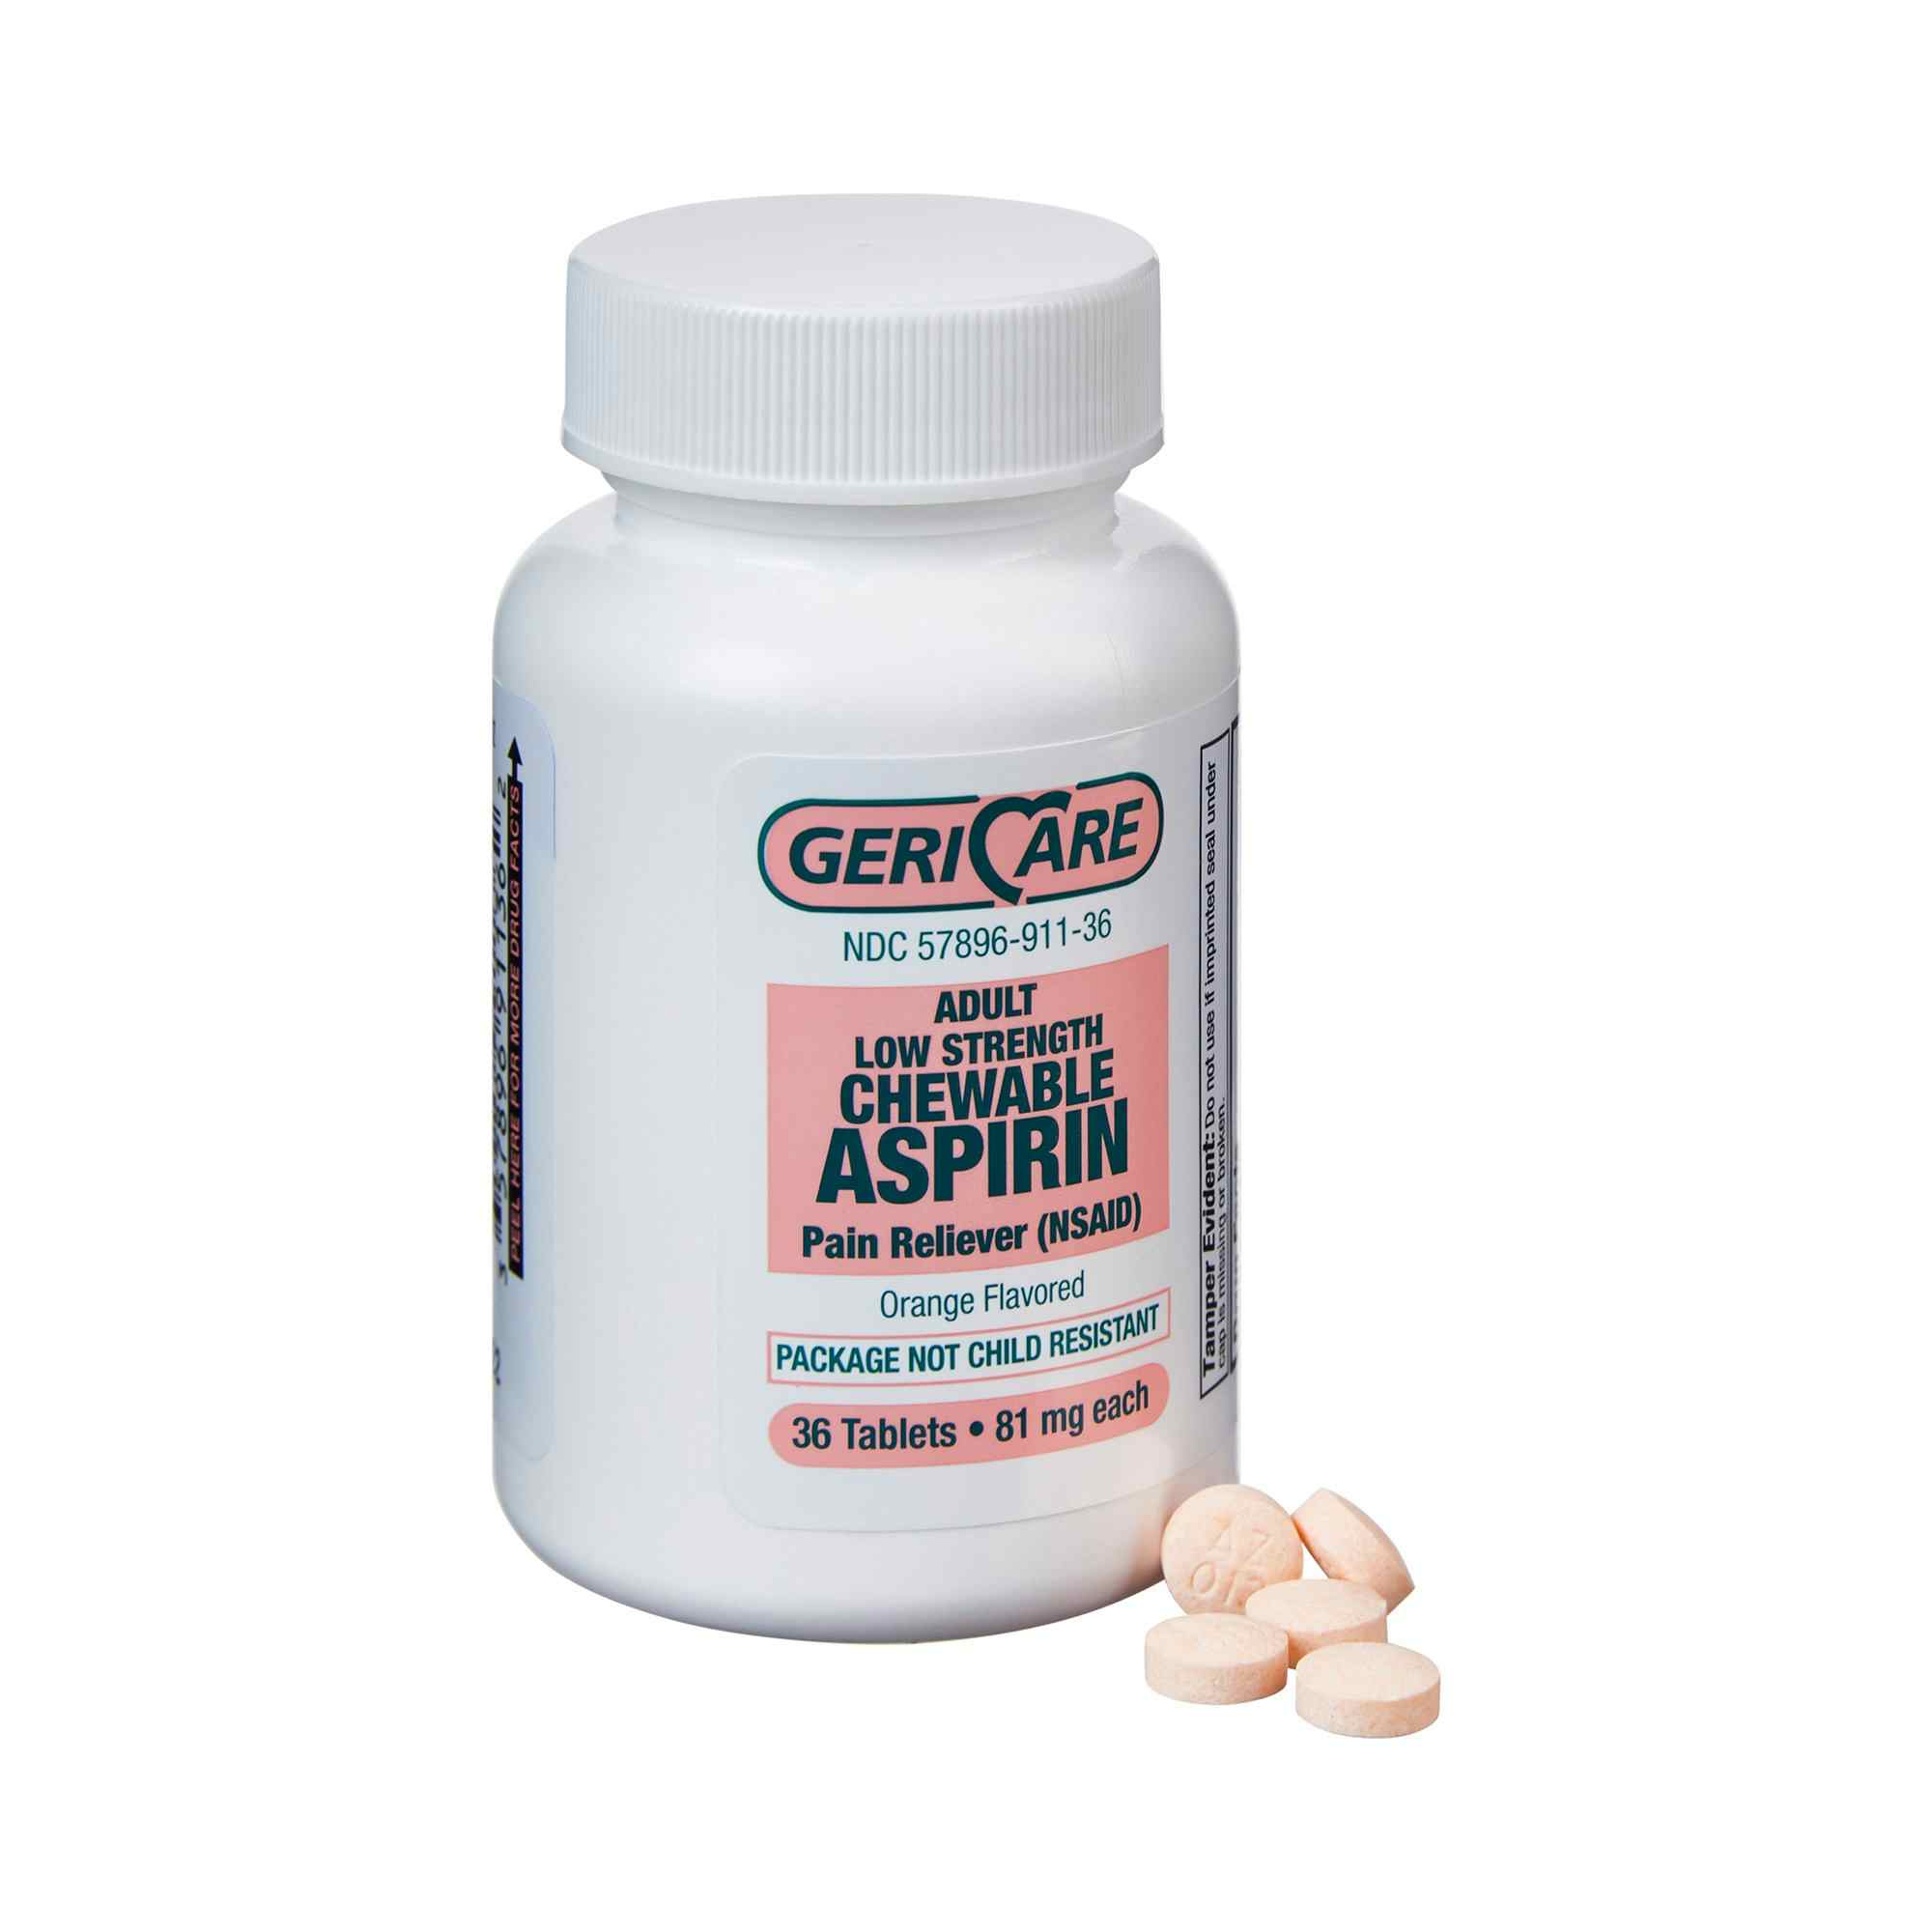 Geri-Care Adult Low Strength Chewable Aspirin Pain Reliever, 81 mg., 911-36-GCP, 1 Each